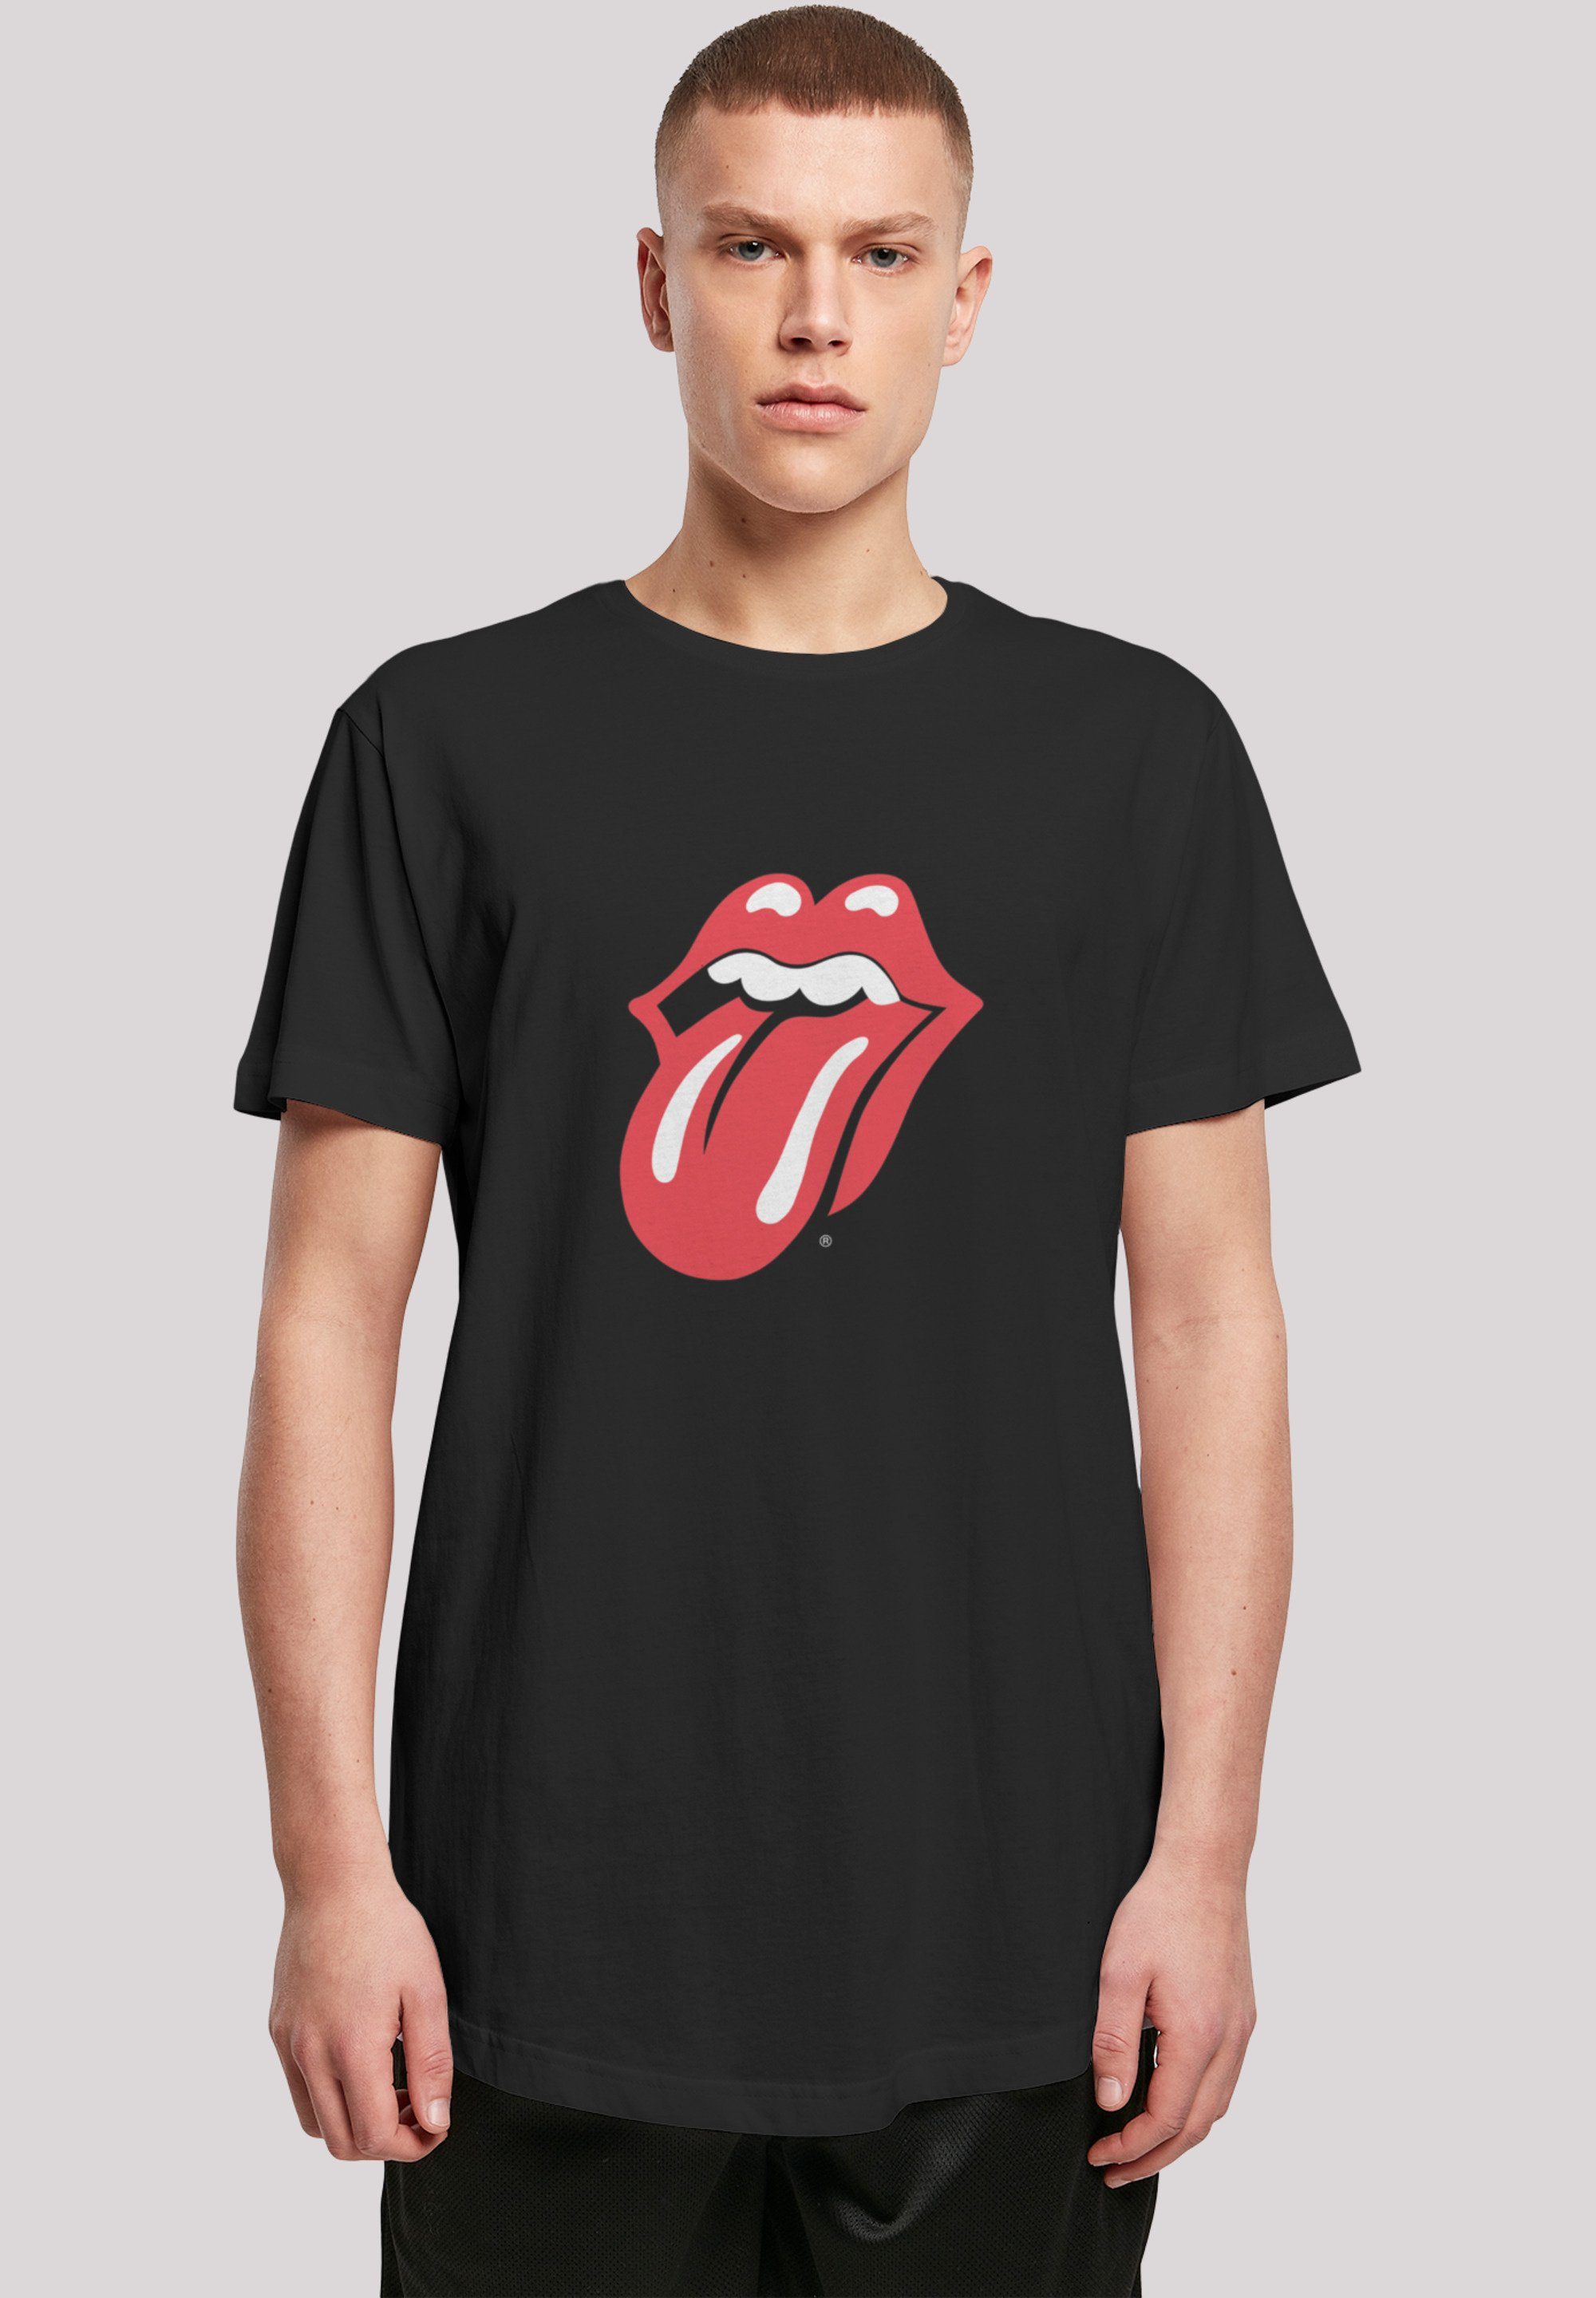 F4NT4STIC T-Shirt The Rolling Black Stones The Print, Classic lizenziertes Tongue Stones Offiziell T-Shirt Rolling Rockband